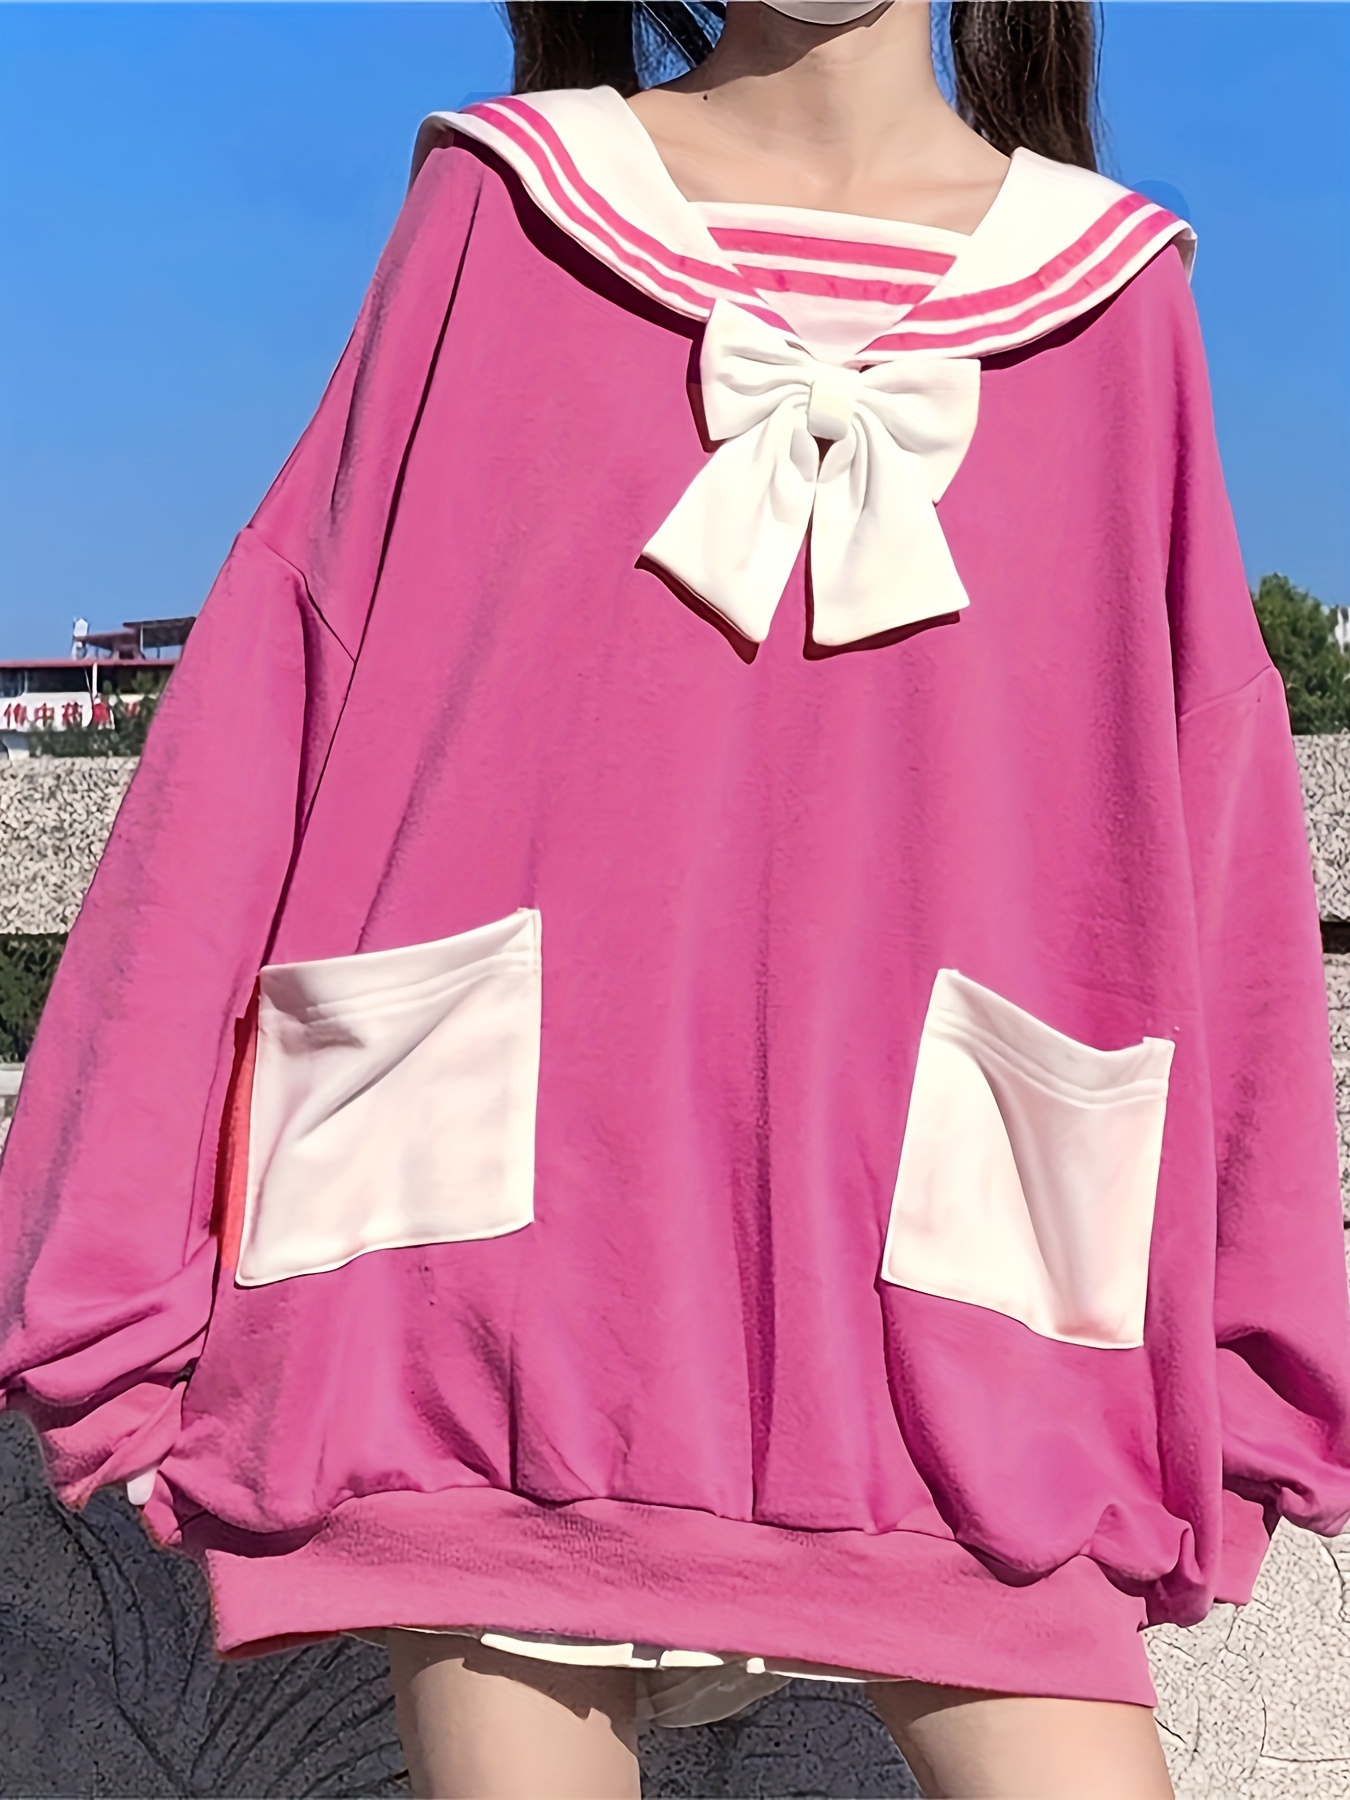 Is That The New Kawaii Contrast Lace Frill Trim Zip Up Hoodie ??